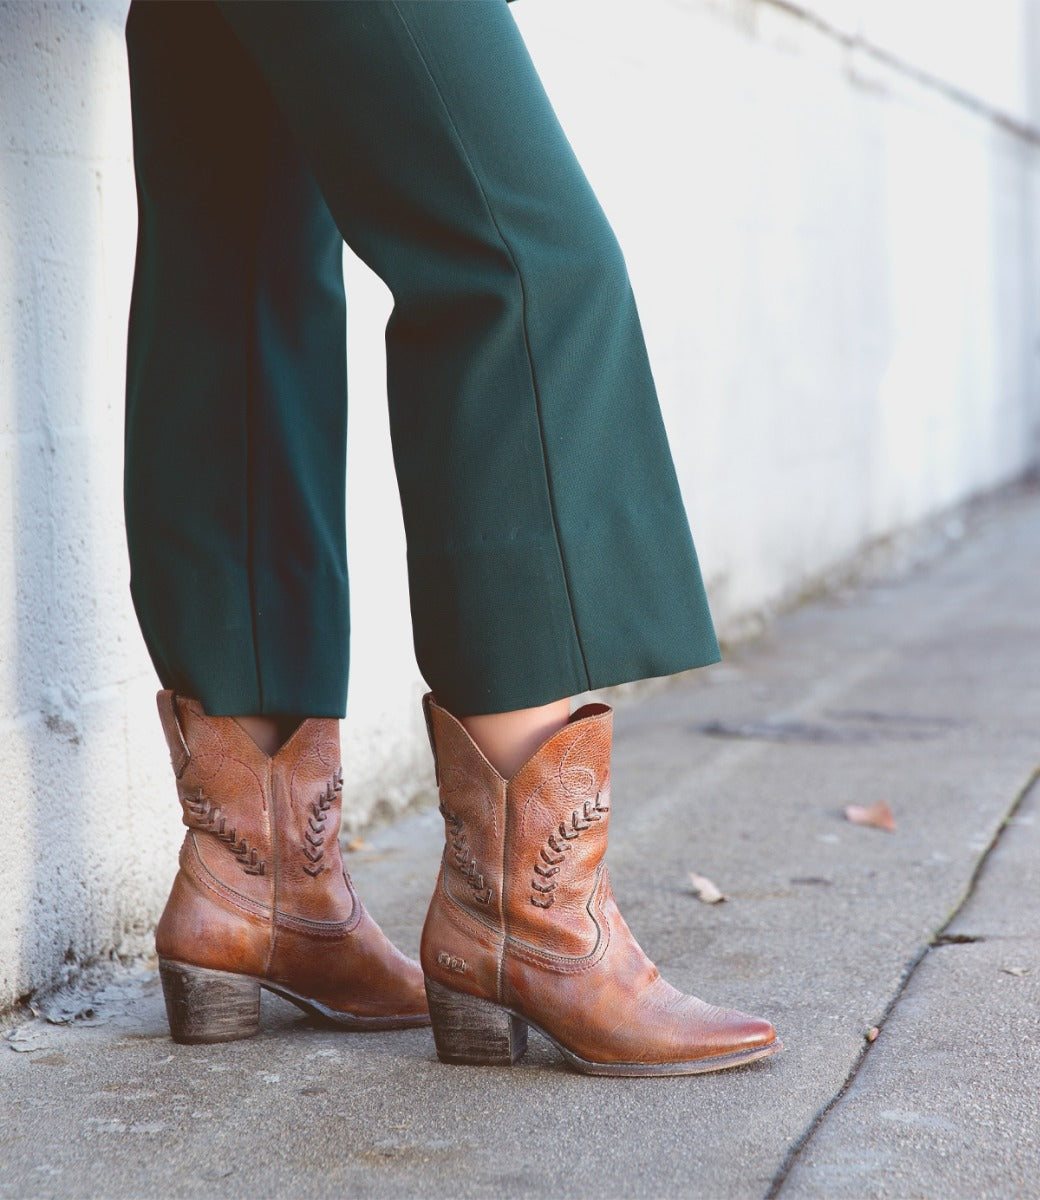 A woman wearing green pants and brown Bed Stu cowboy boots.